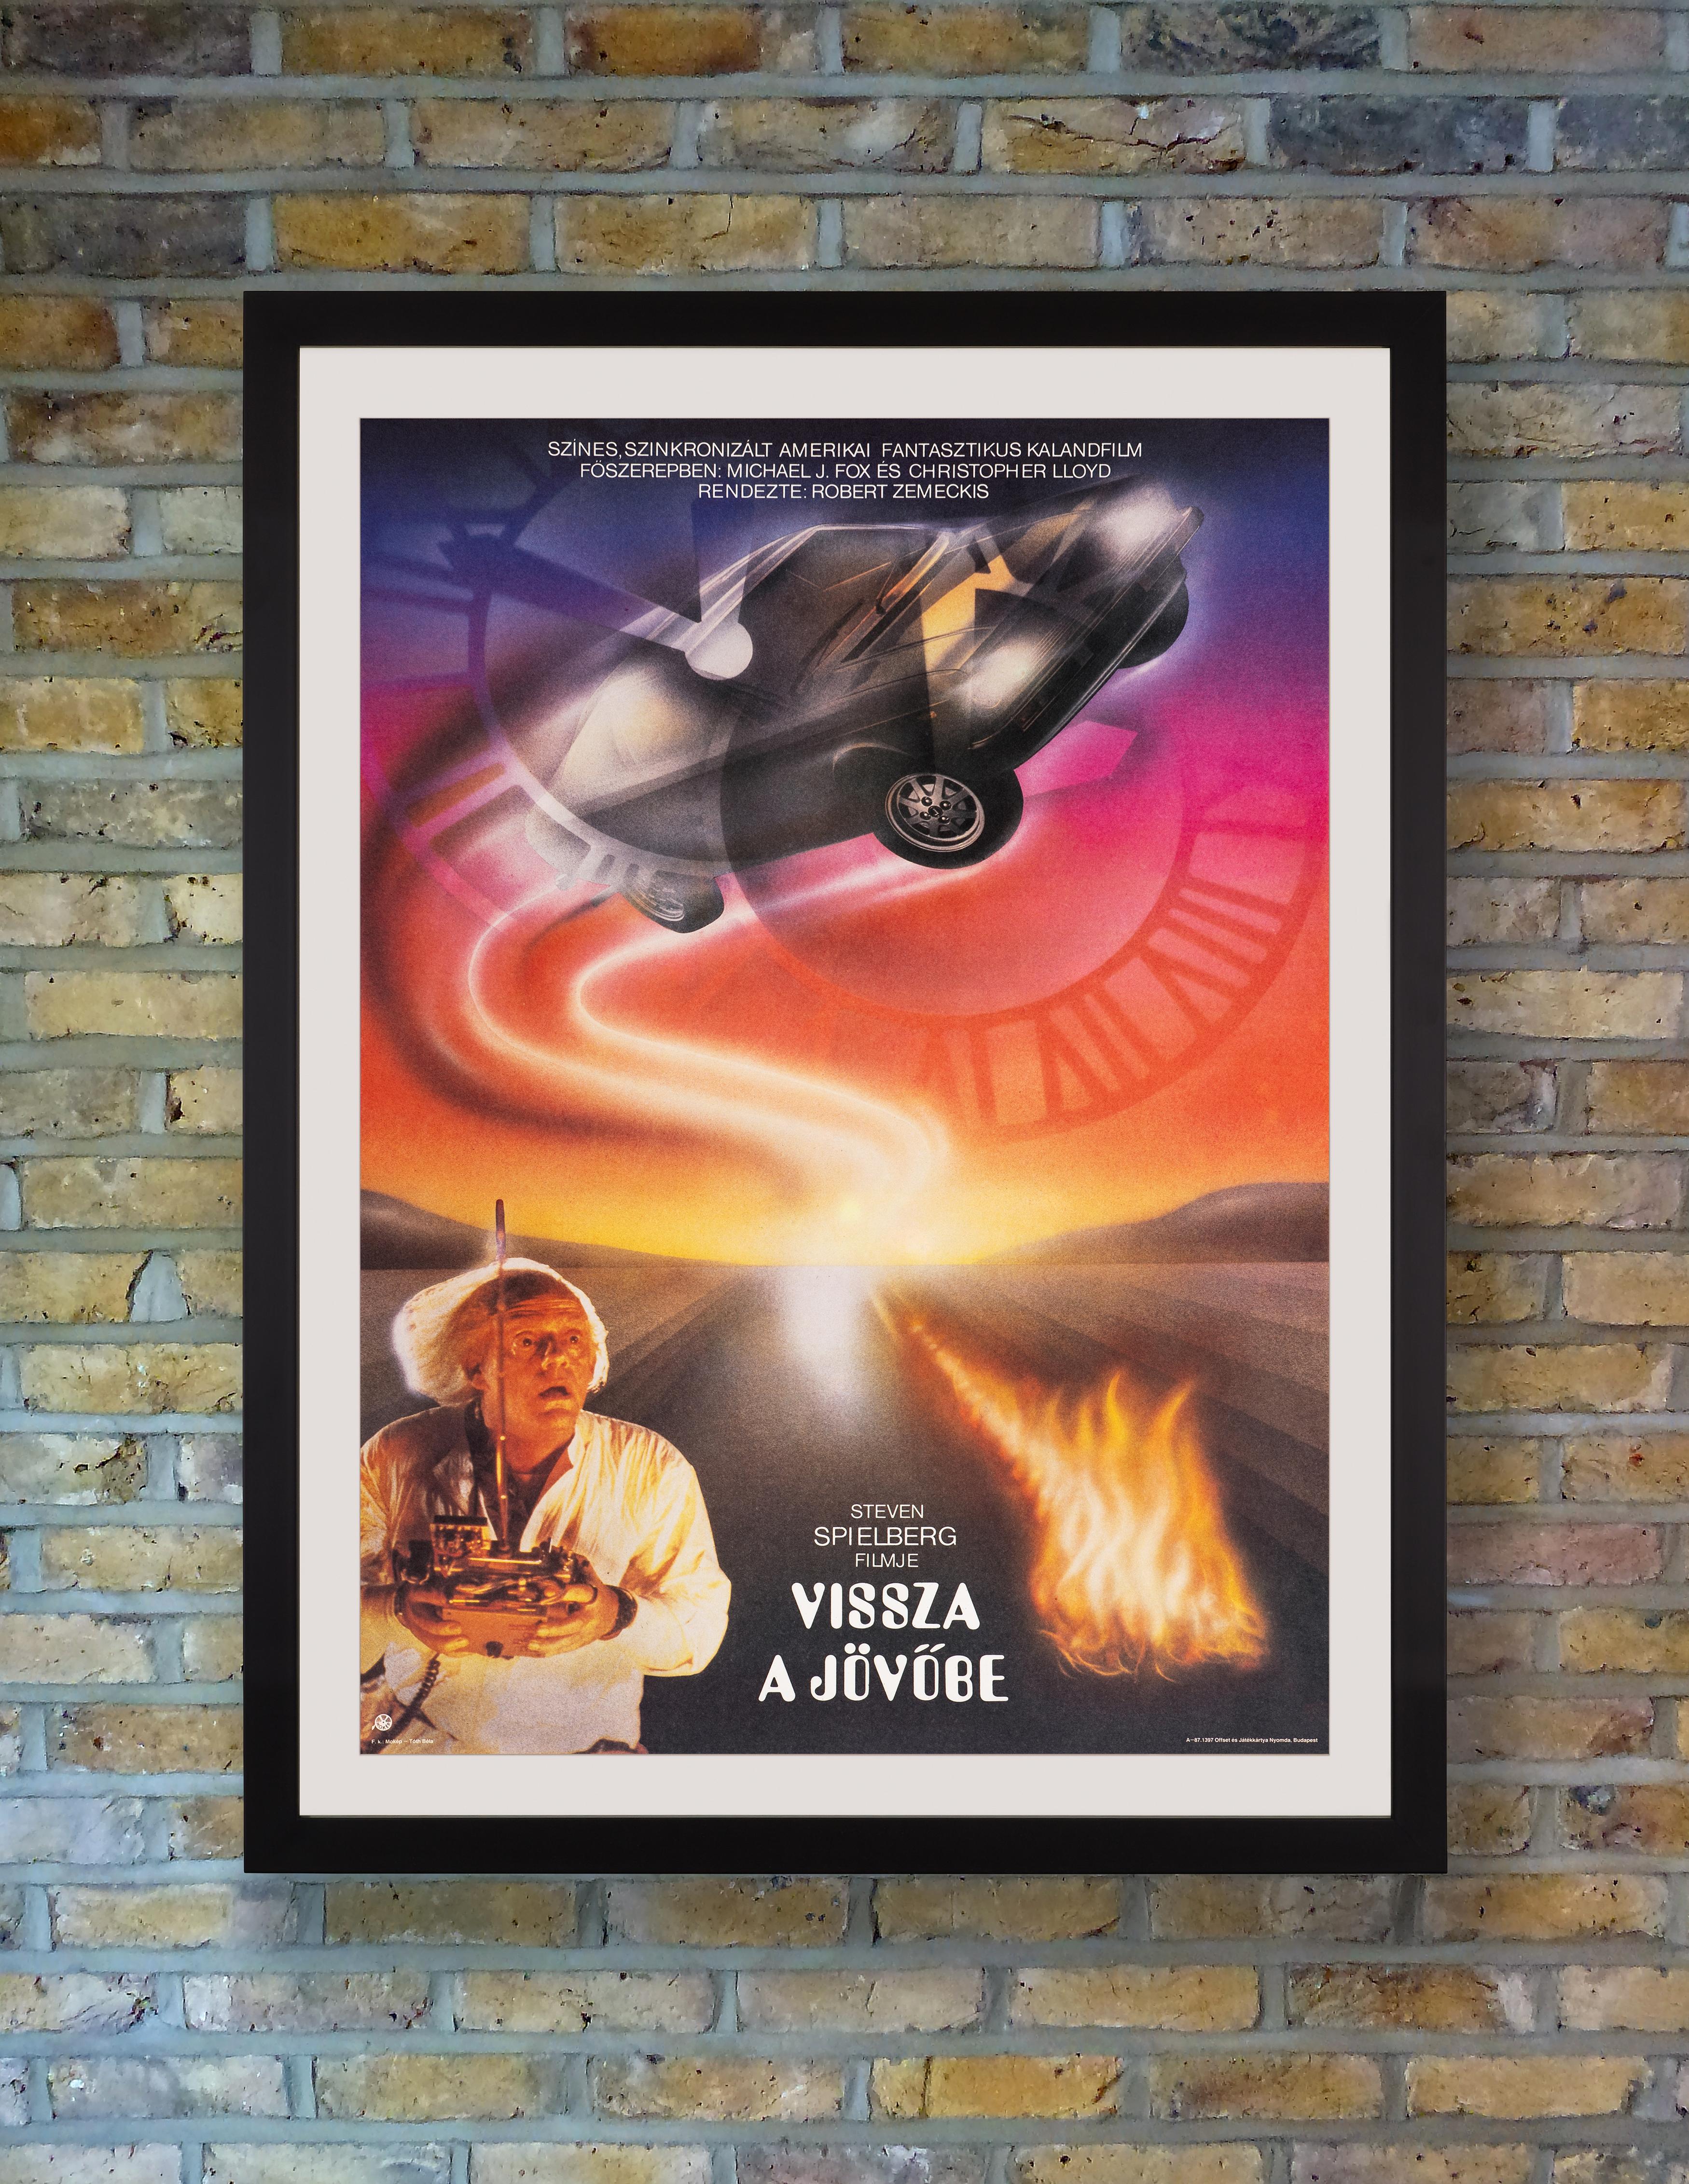 A beloved American blockbuster, Robert Zemeckis' 1985 sci-fi adventure 'Back to the Future' starred Michael J. Fox as teenager Marty McFly, blasted back to 1955 in the plutonium-powered DeLorean time machine created by eccentric scientist Doc Brown.